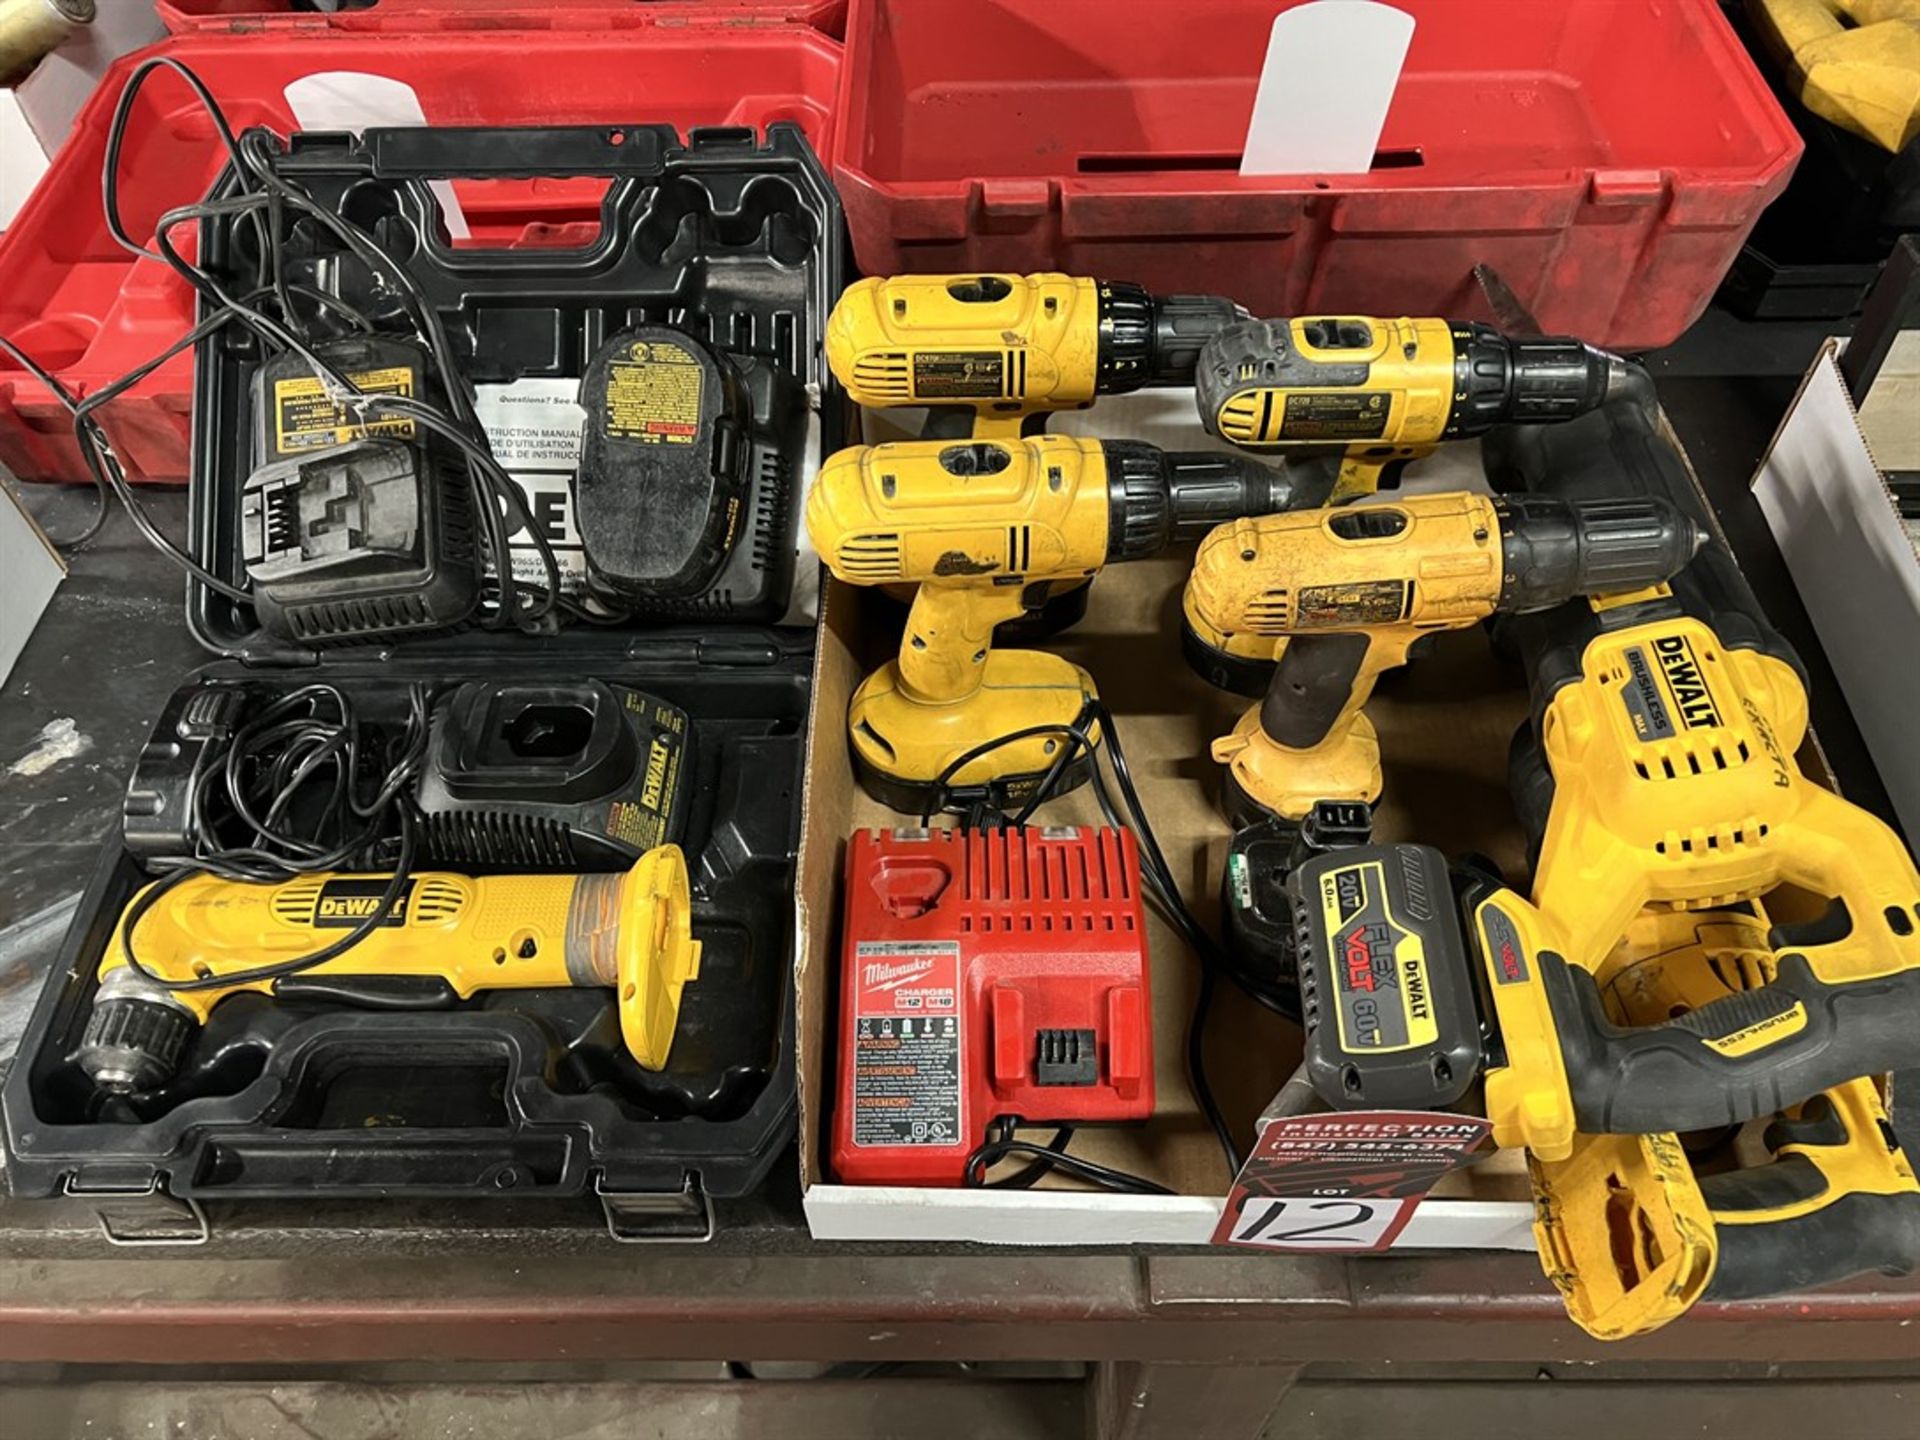 Lot Comprising DEWALT Cordless Tool Inculding Drills, Reciprocating Saws, Batteries and Chargers